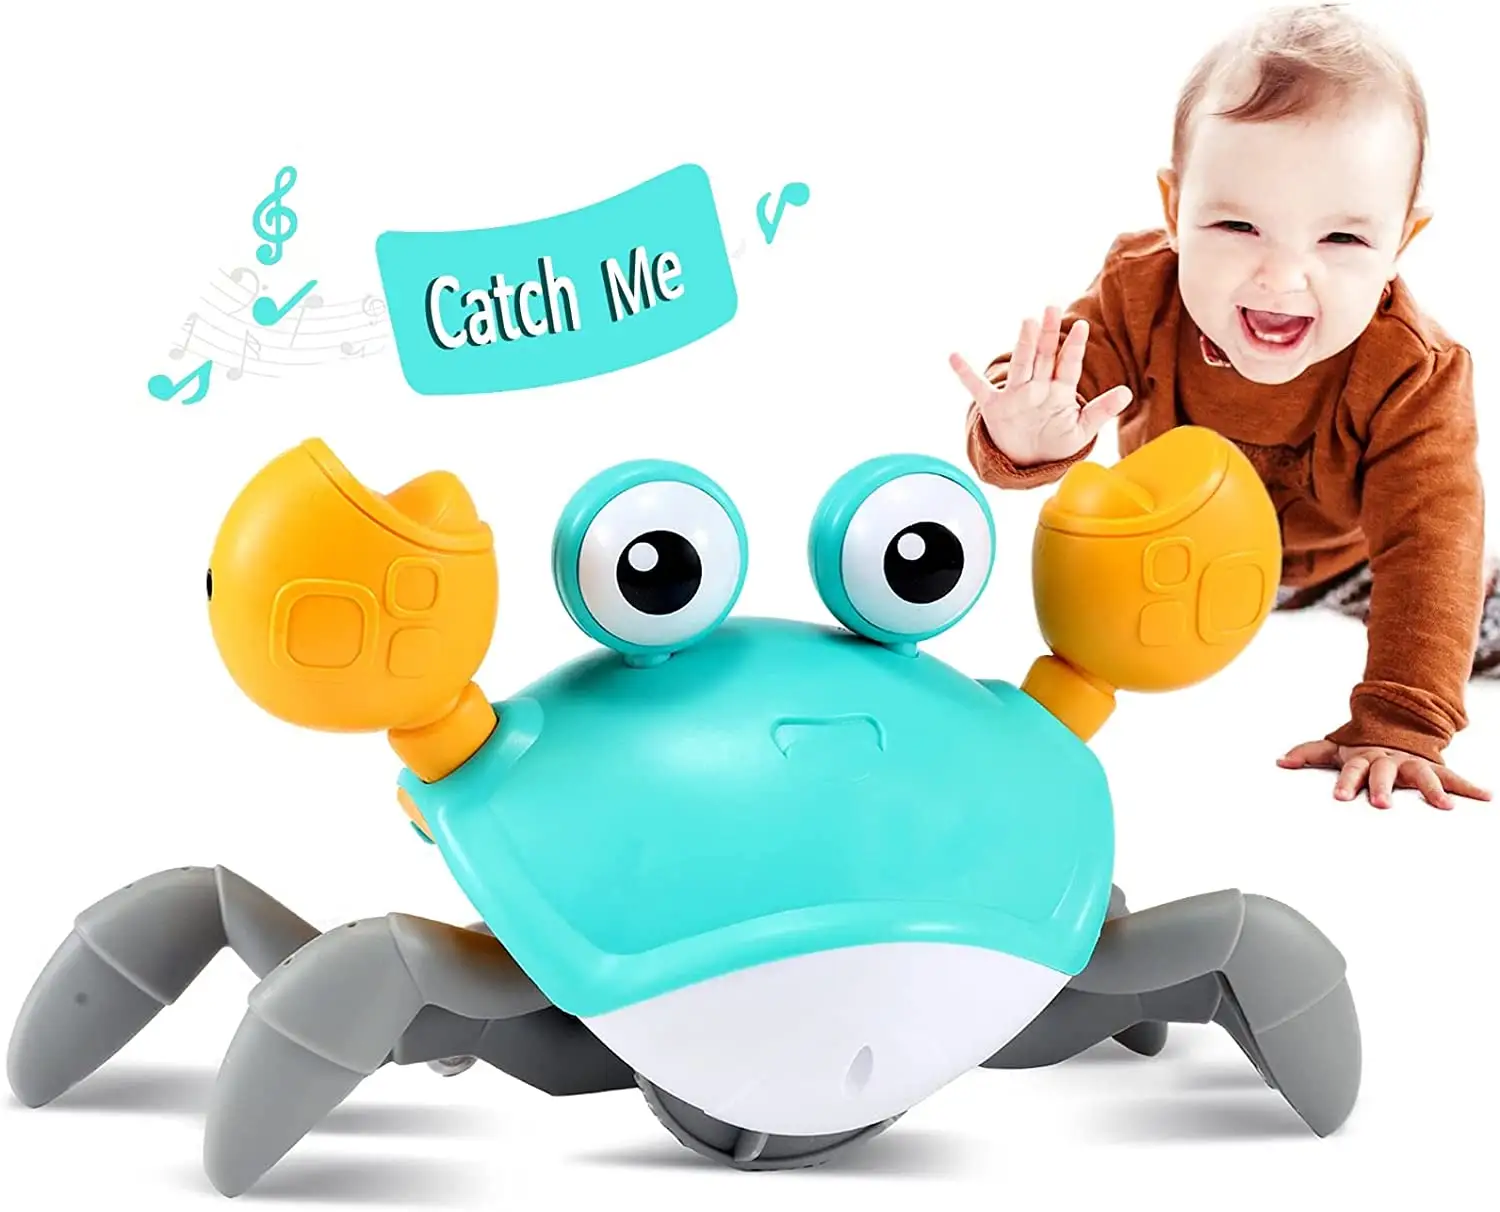 New Hot Sales Baby Crawl Crab Crawling Crab Baby Toy Electric Induction Crab Toy for kids